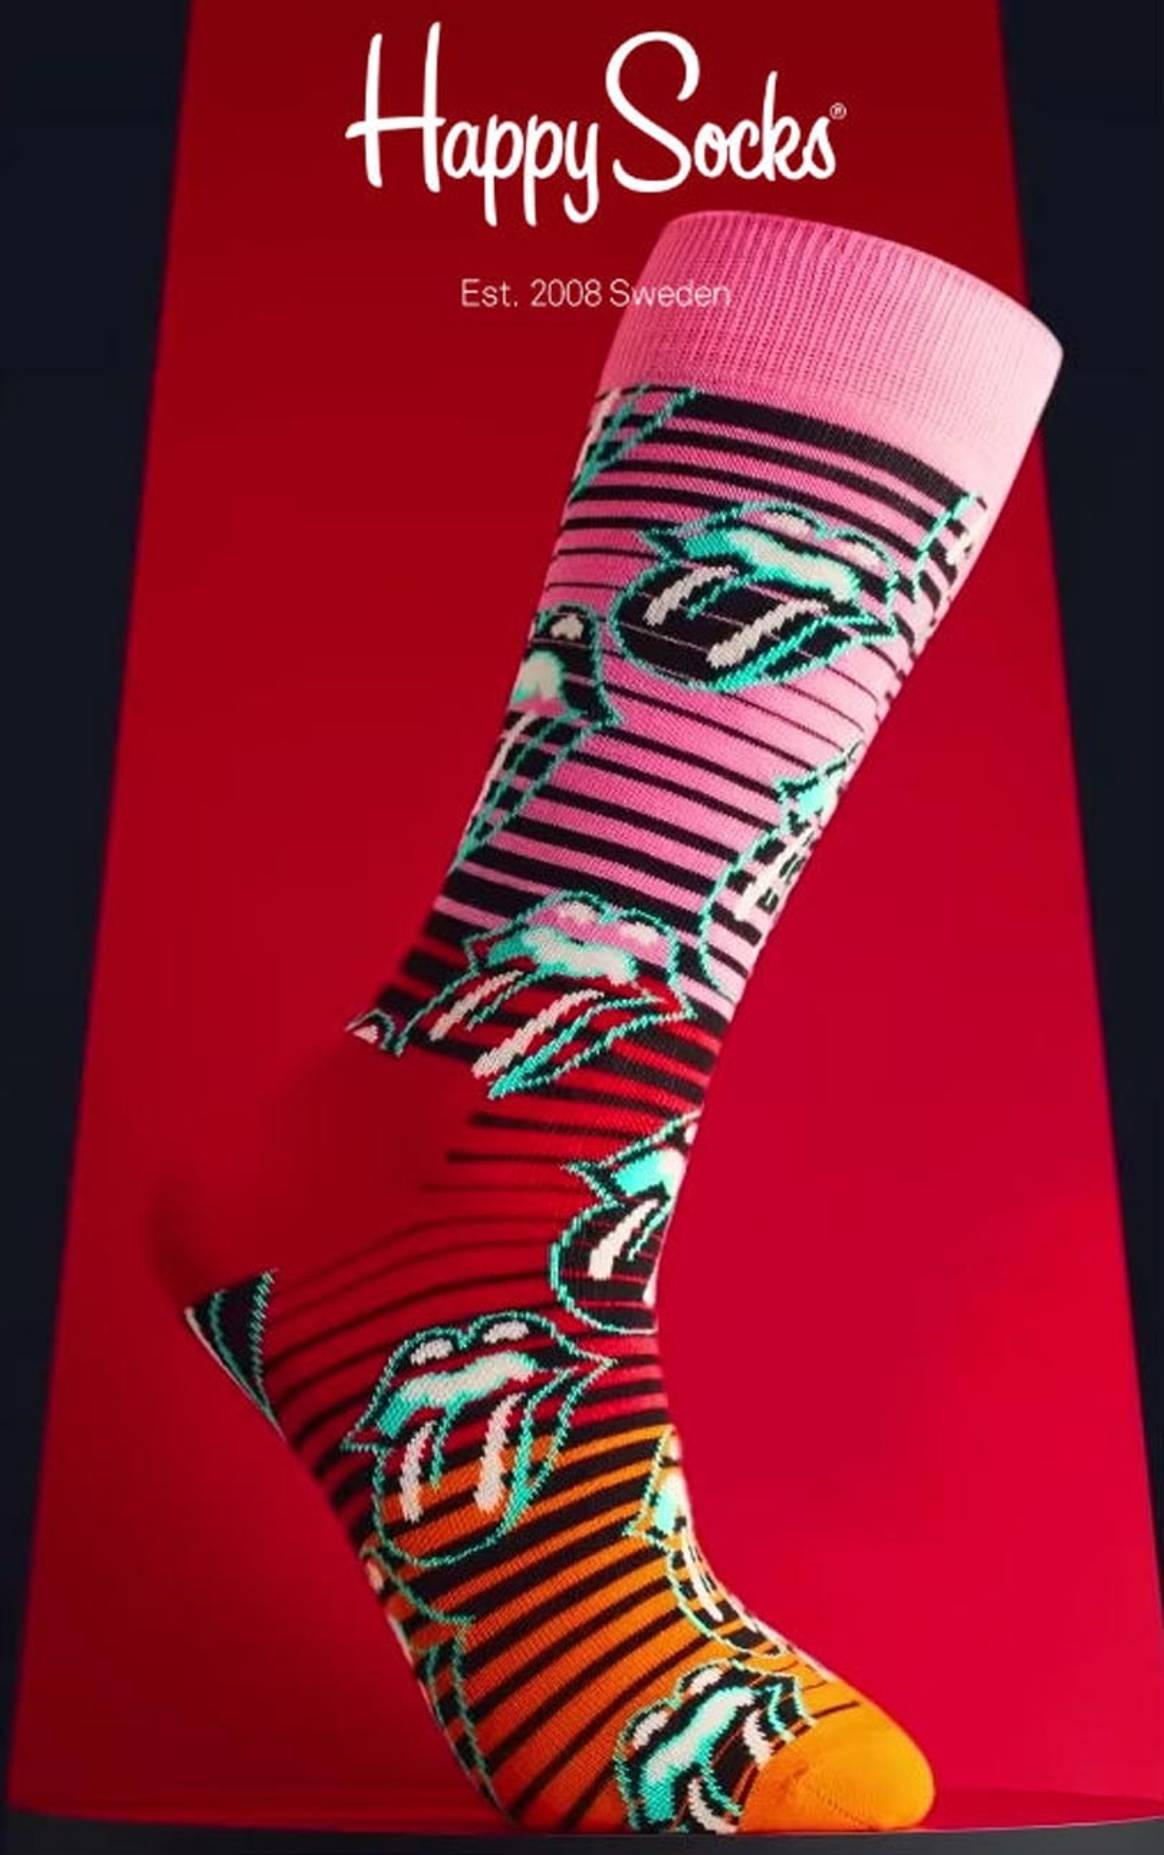 Happy Socks collaborates with The Rolling Stones